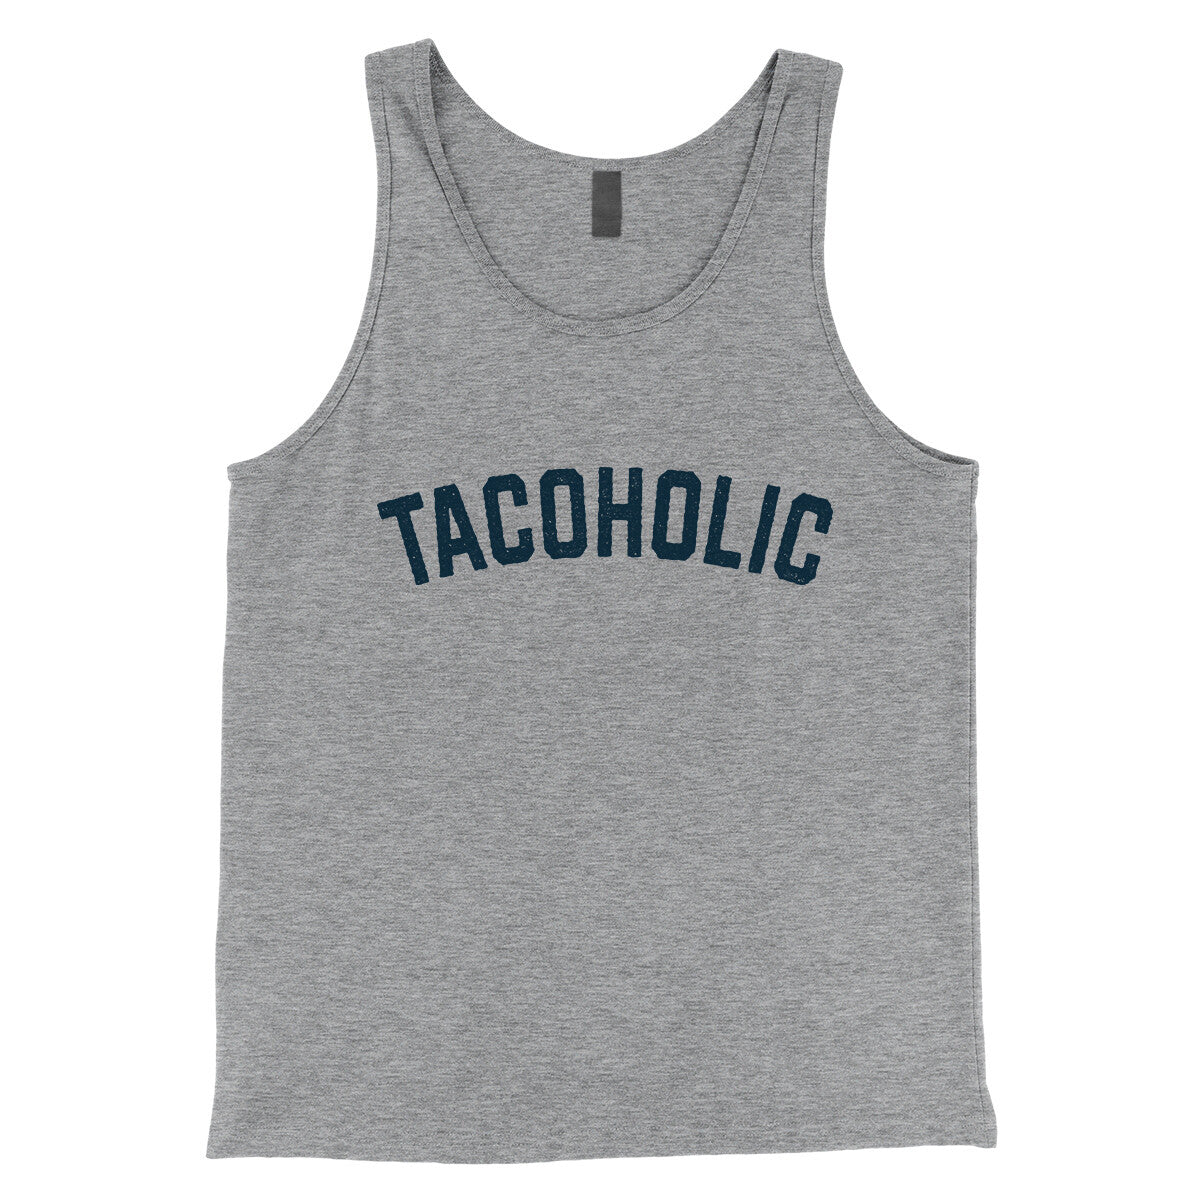 Tacoholic in Athletic Heather Color